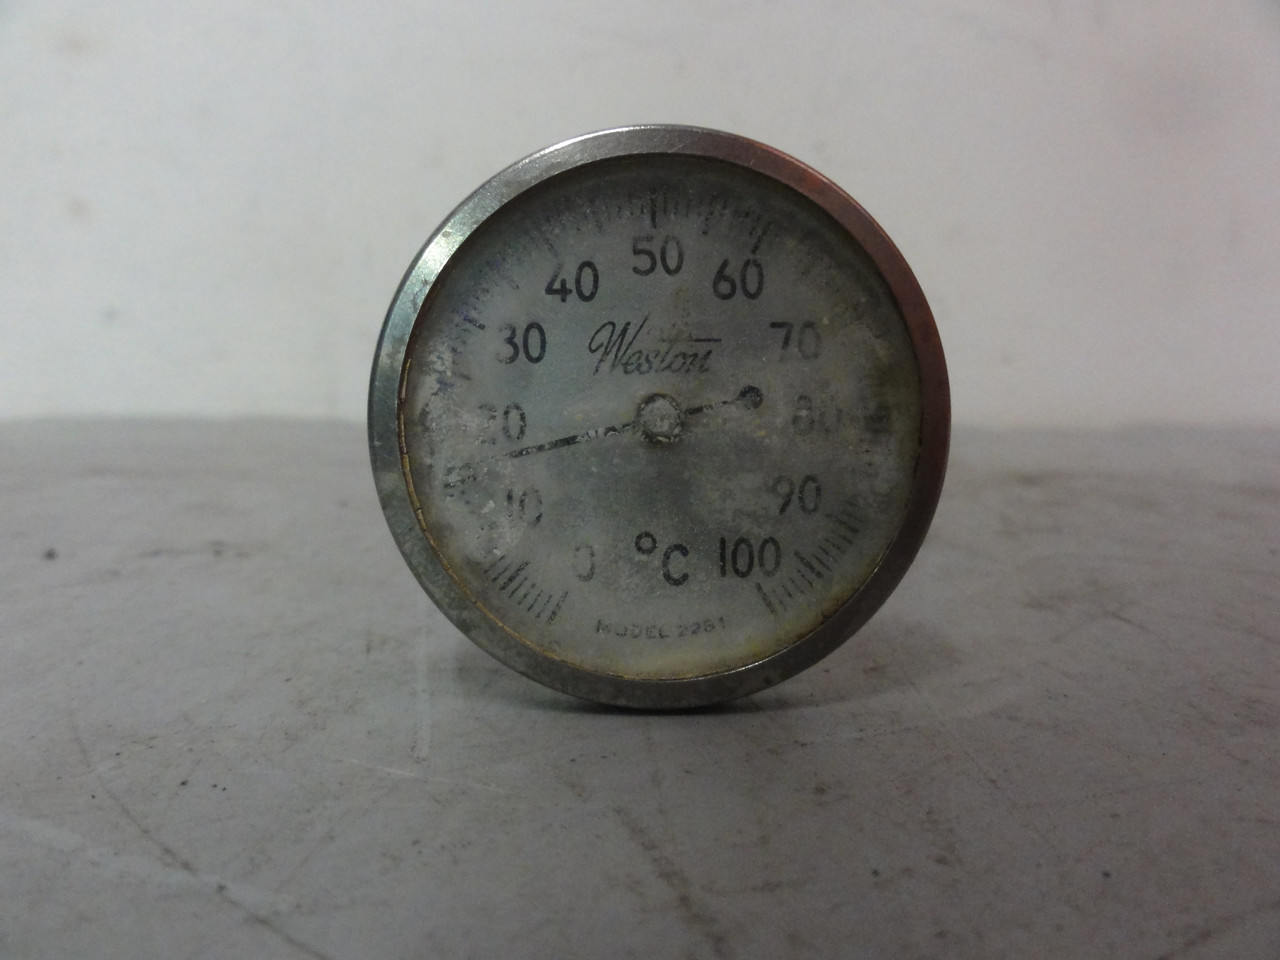 Weston Model 2261 Thermometer 0-100 Degrees Celsius